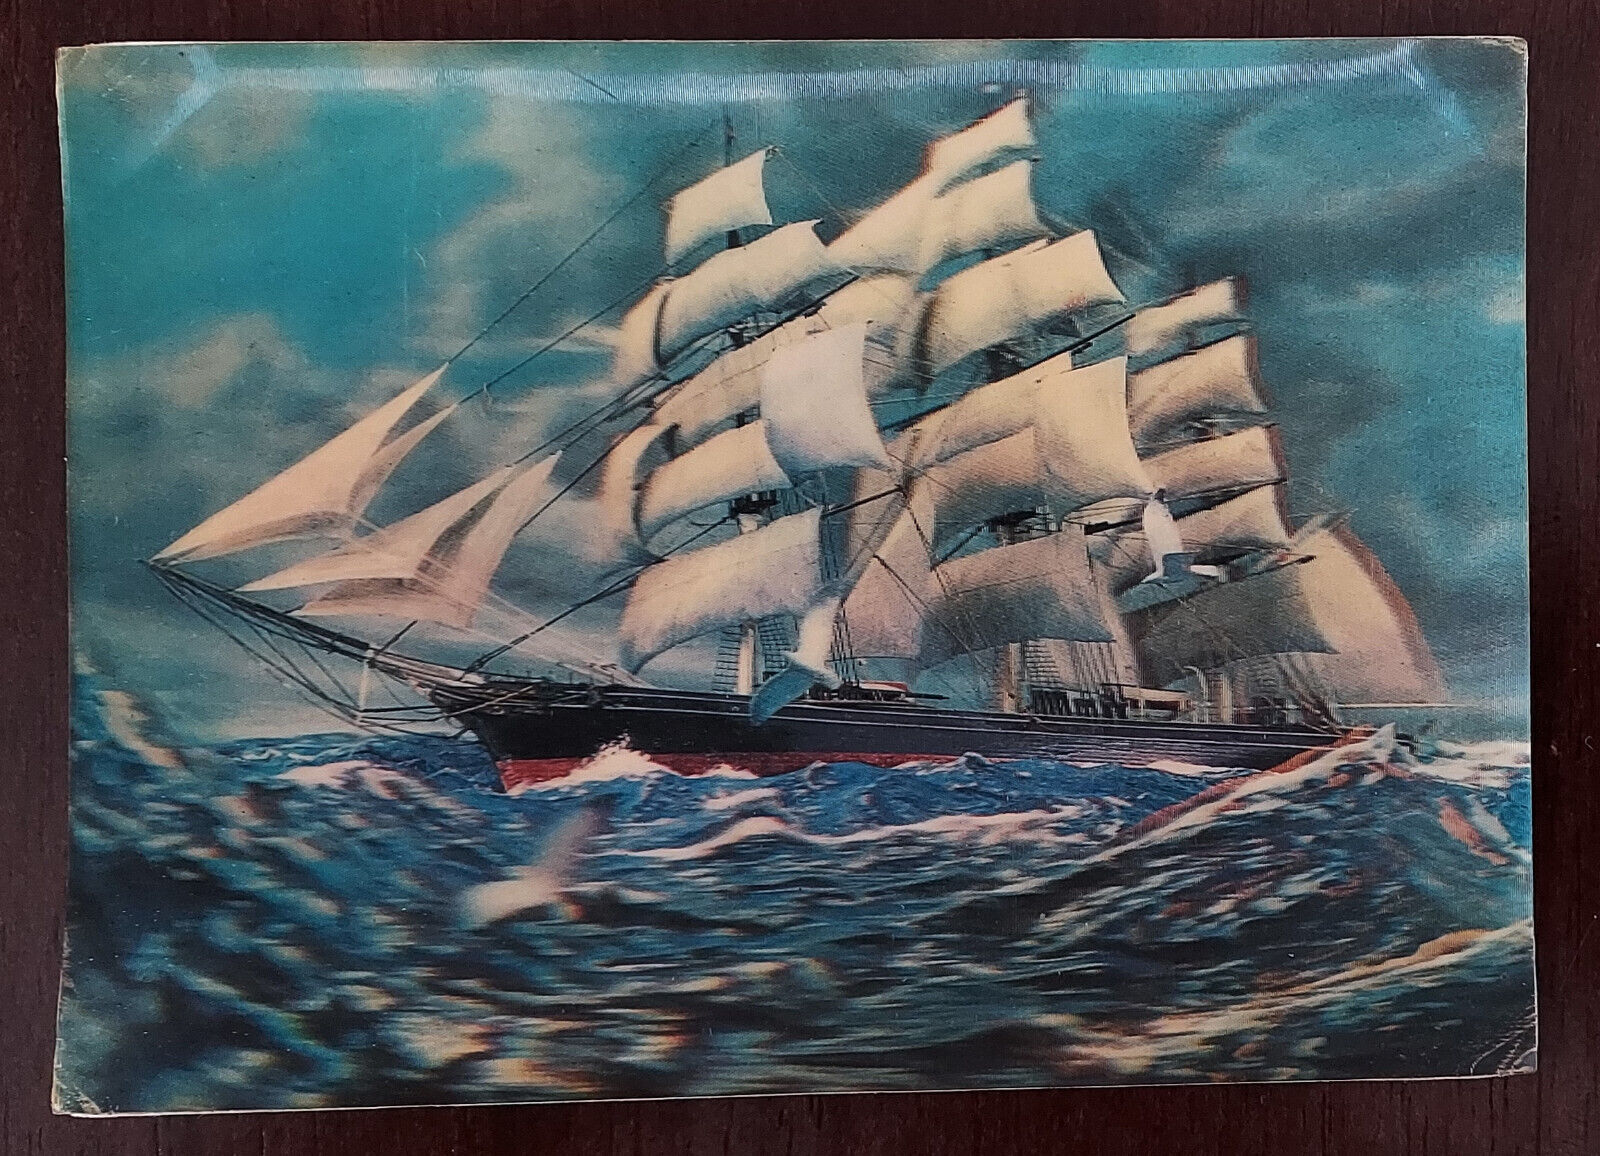 Antique 3D Postcard of Sailing ship, made in Japan, distributed in USA